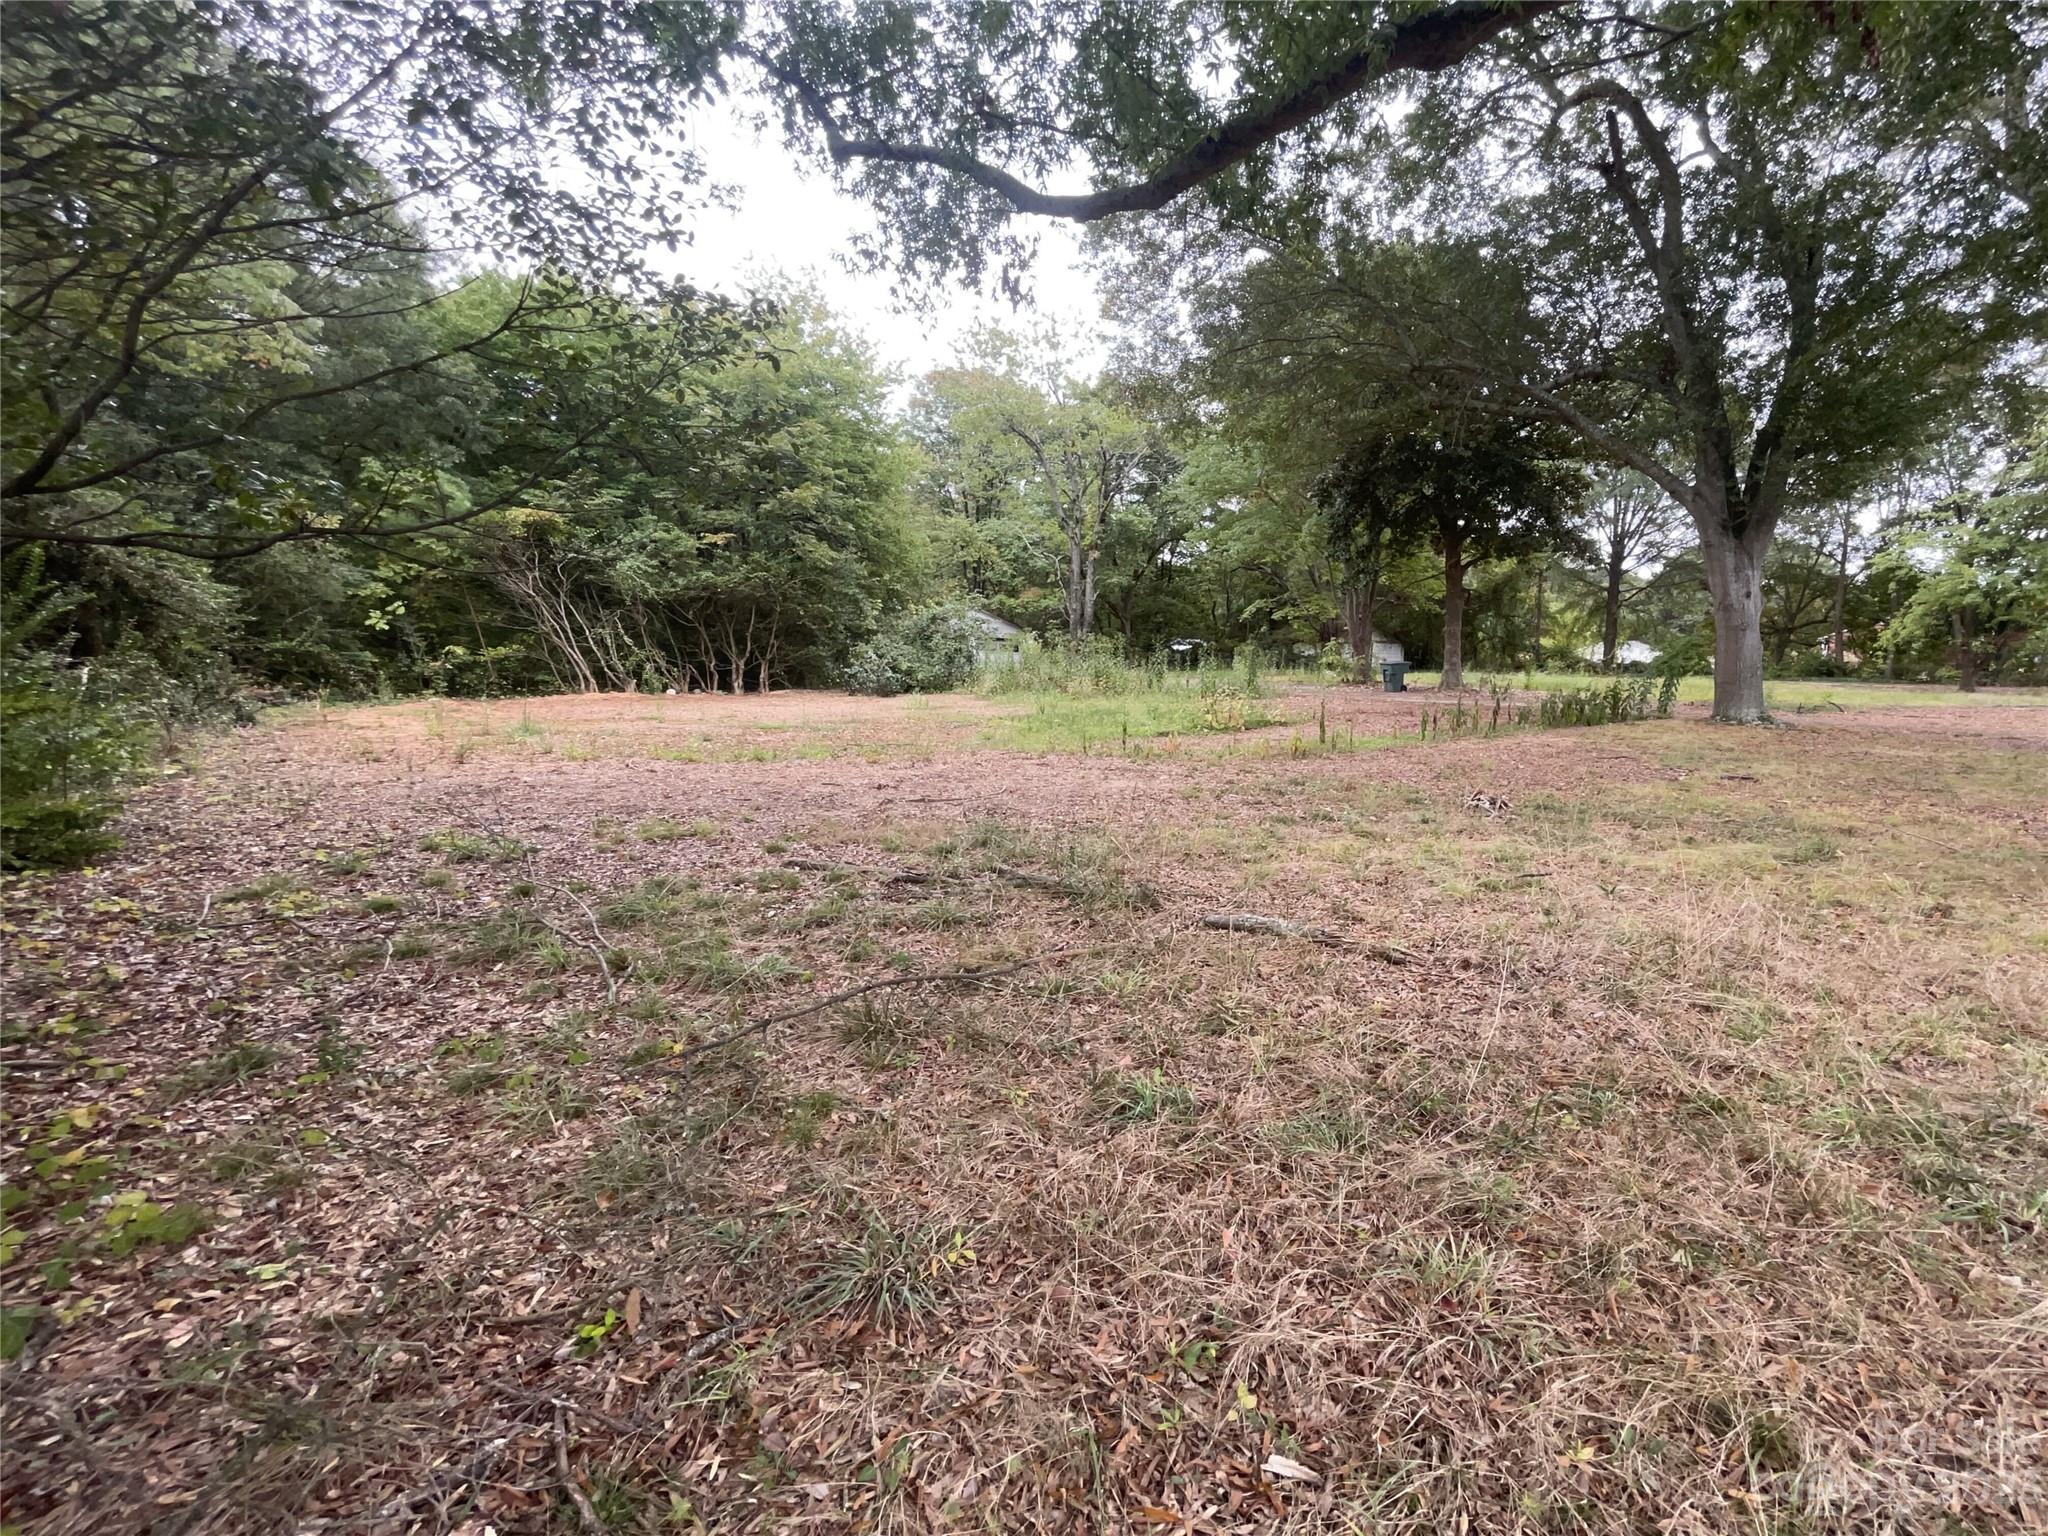 a view of dirt yard with a trees